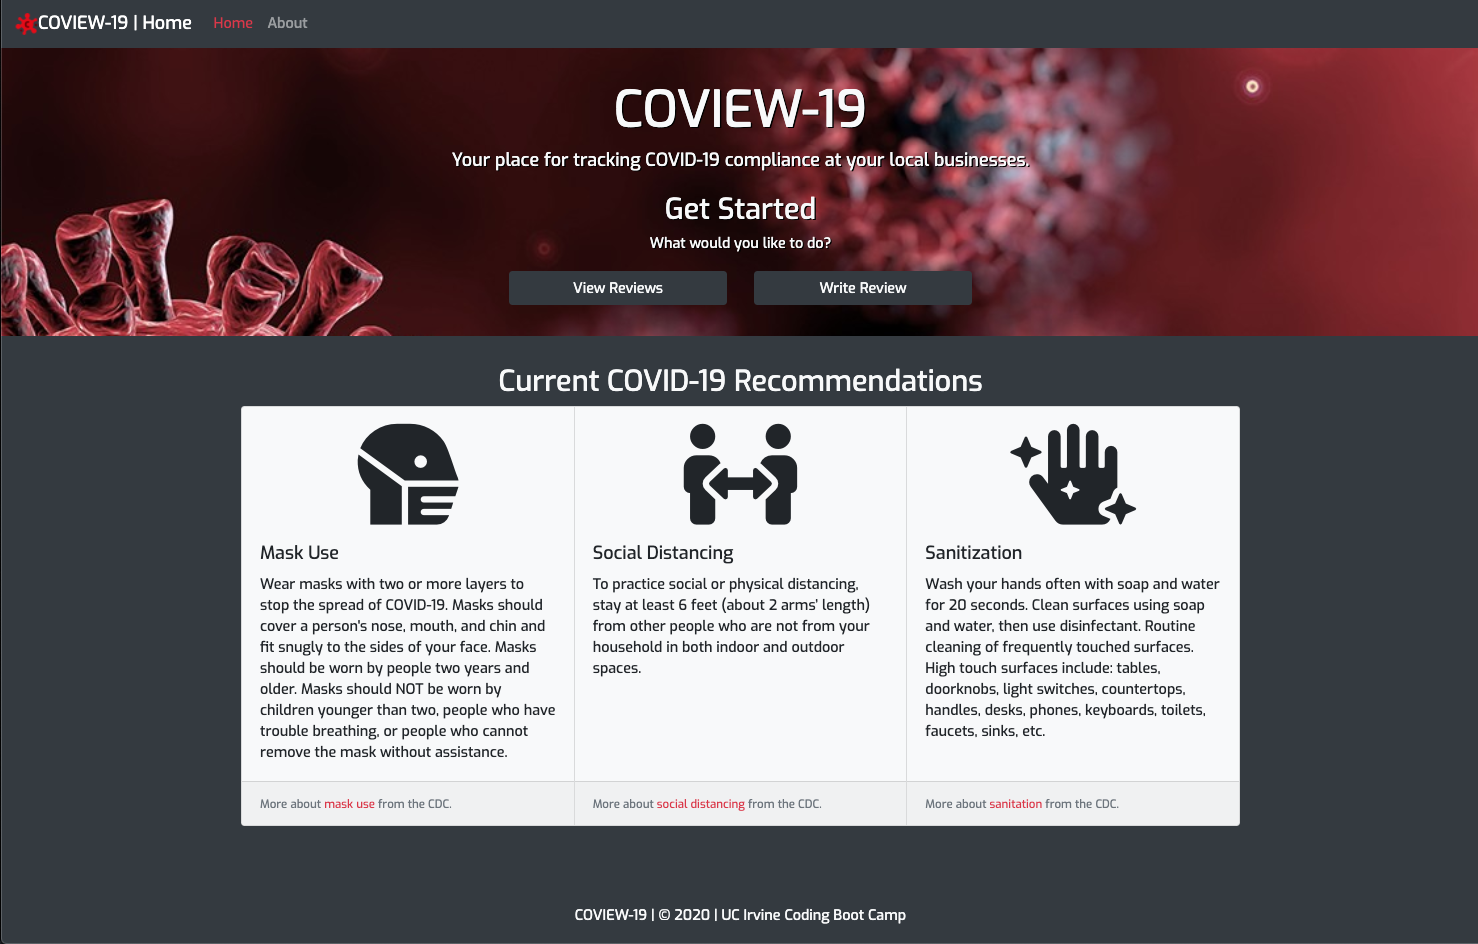 COVIEW-19 Home